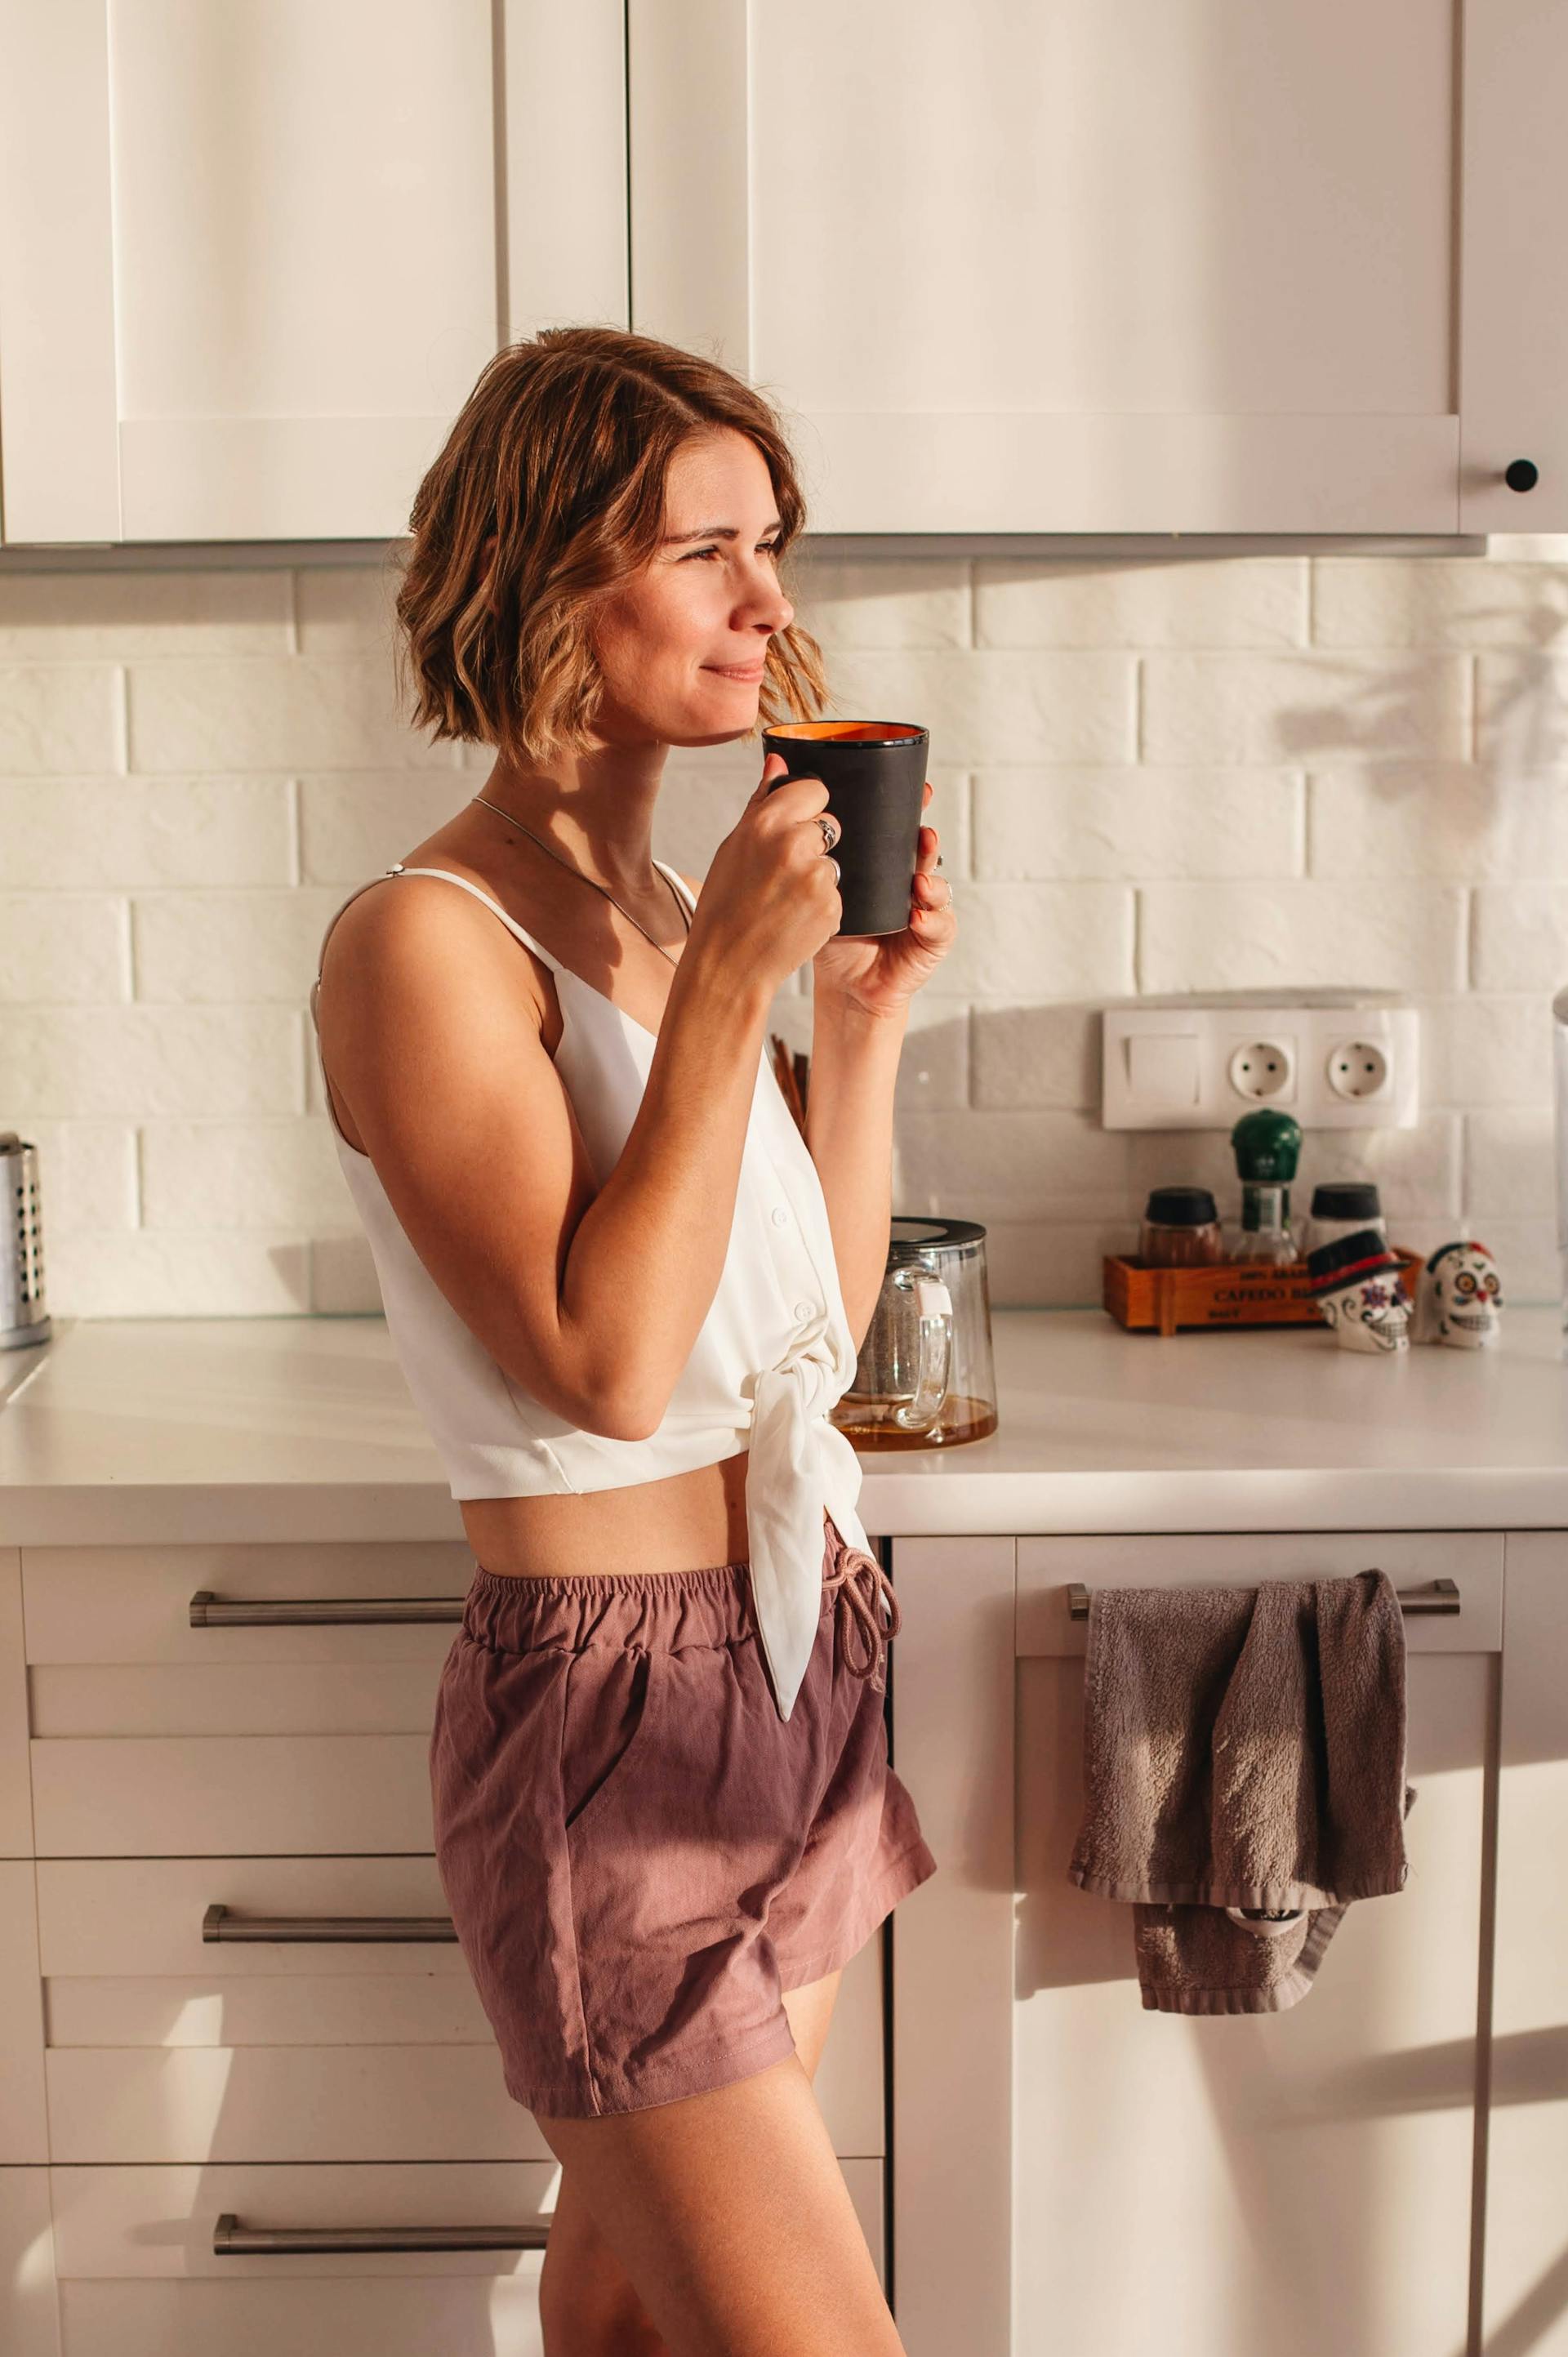 A woman in the kitchen drinking coffee | Source: Pexels